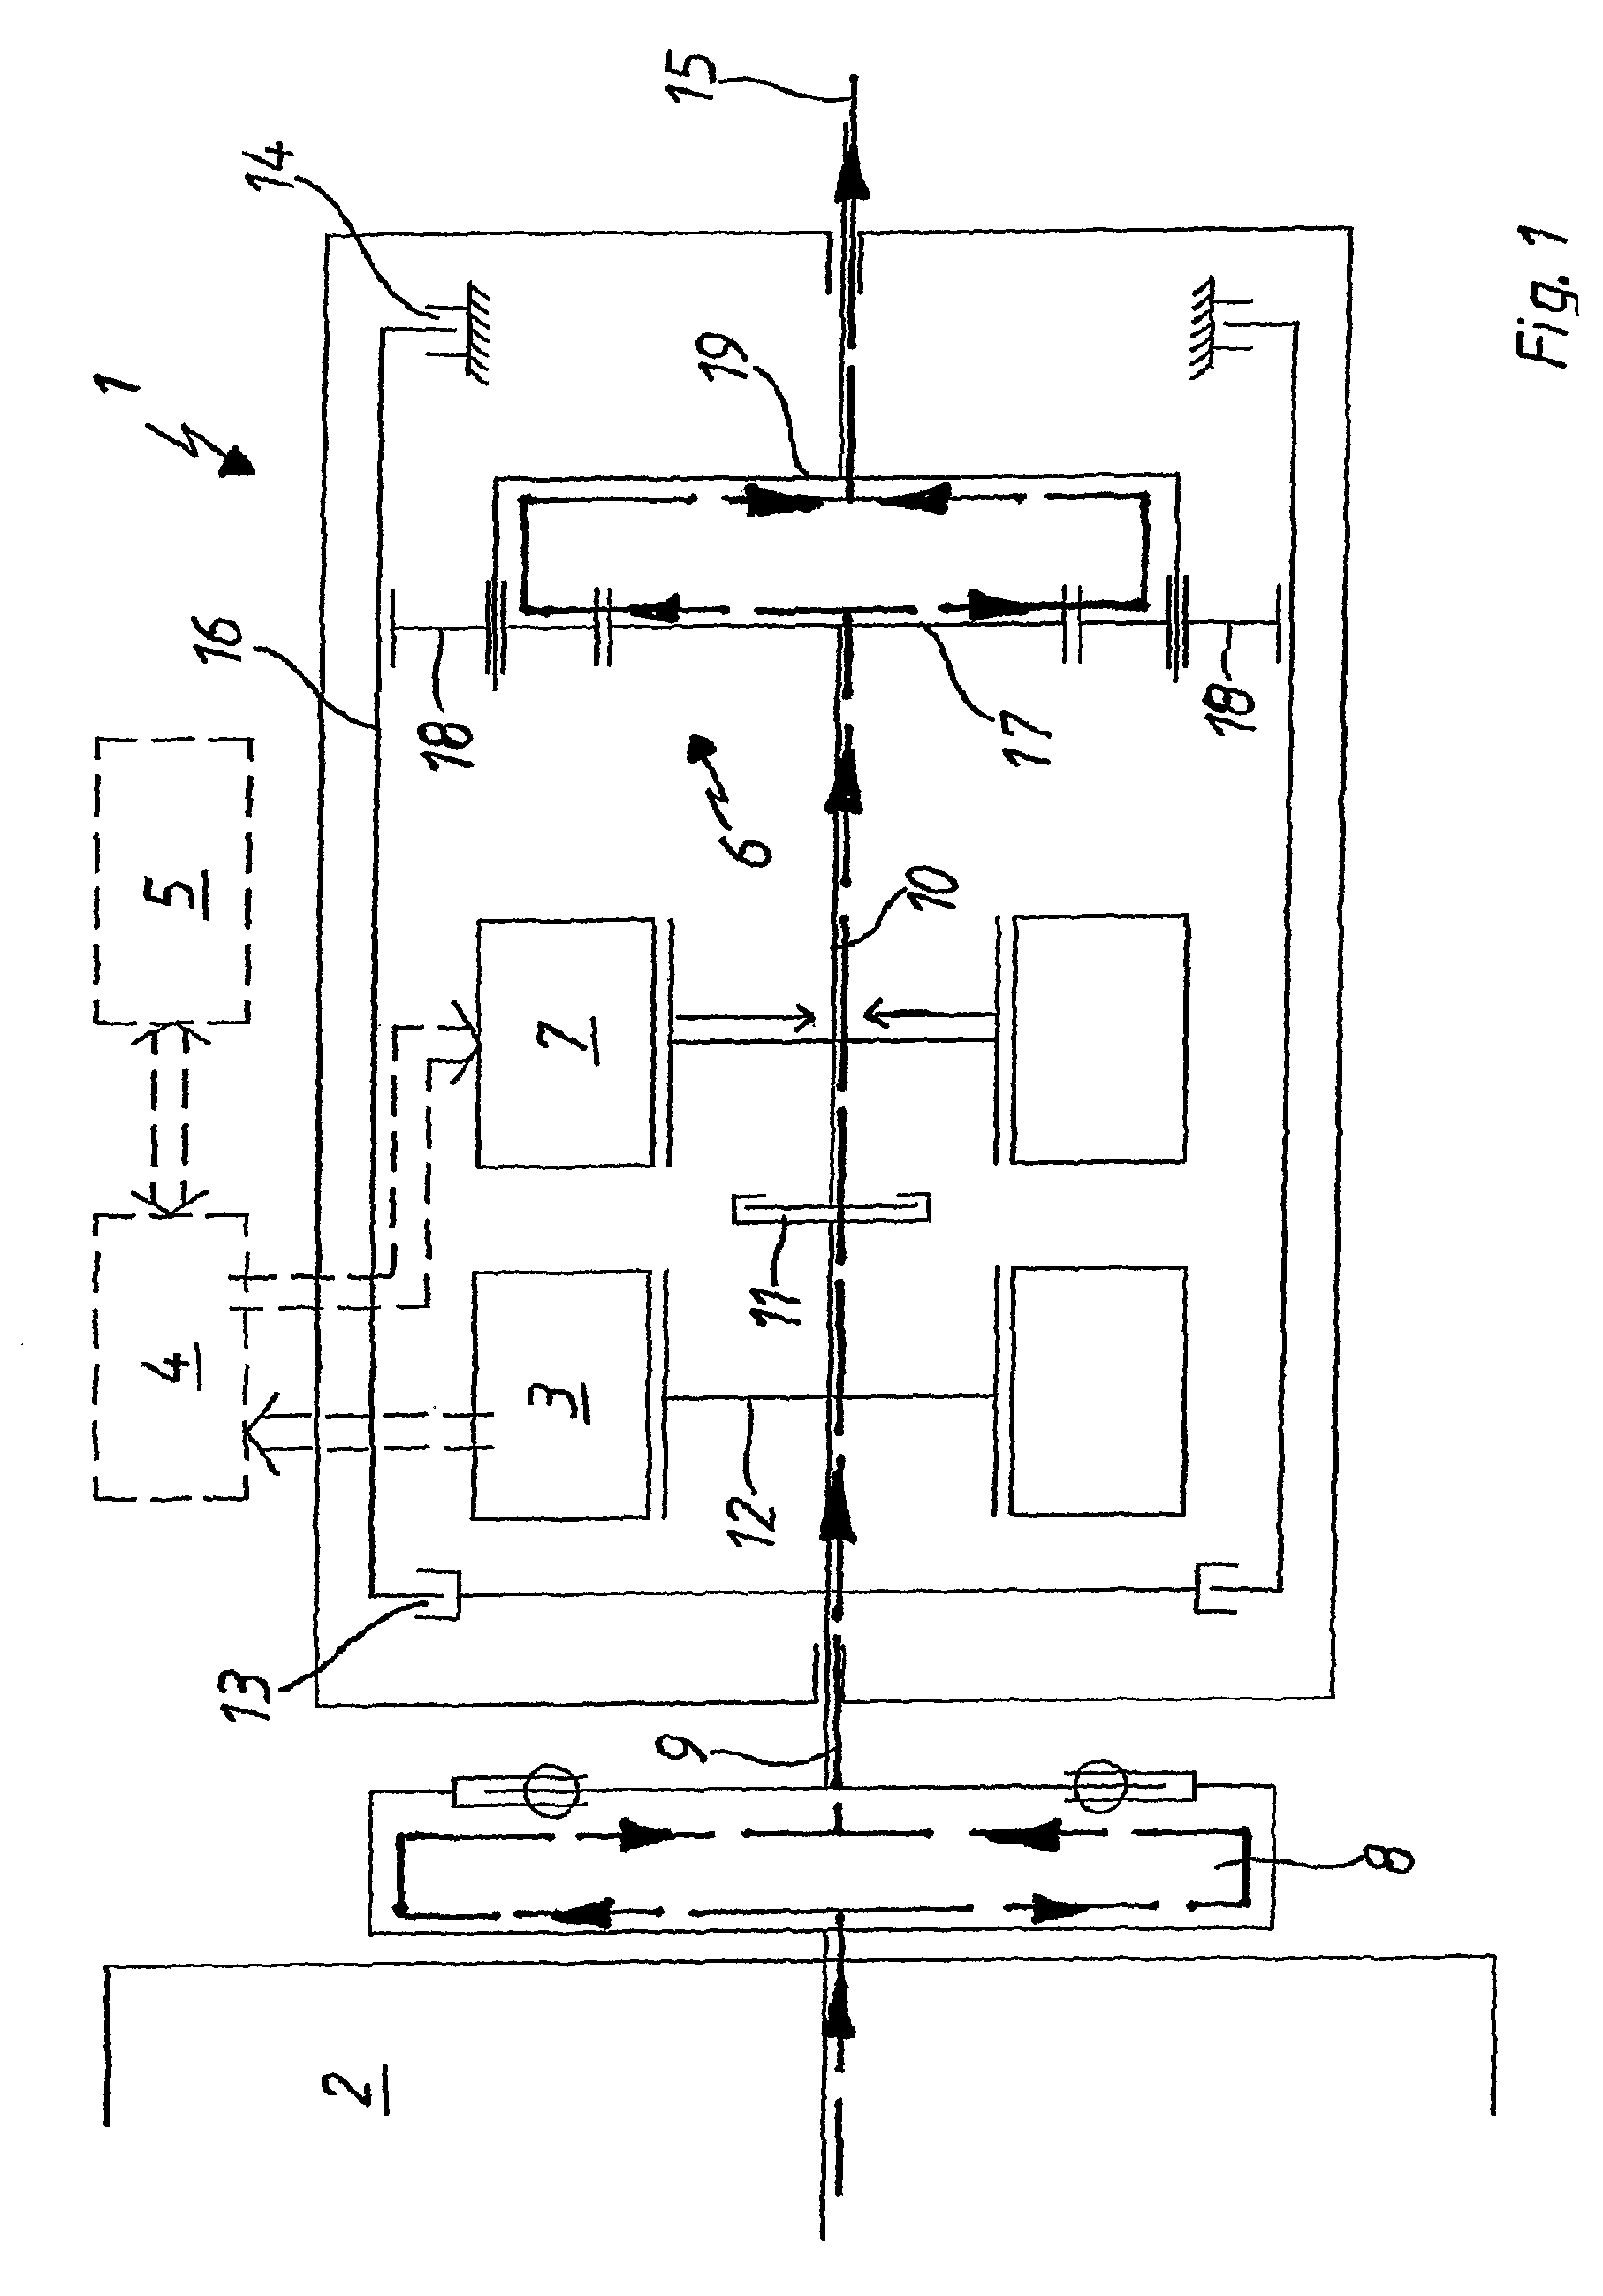 Hybrid drive for vehicles and method for controlling a transmission for a hybrid drive